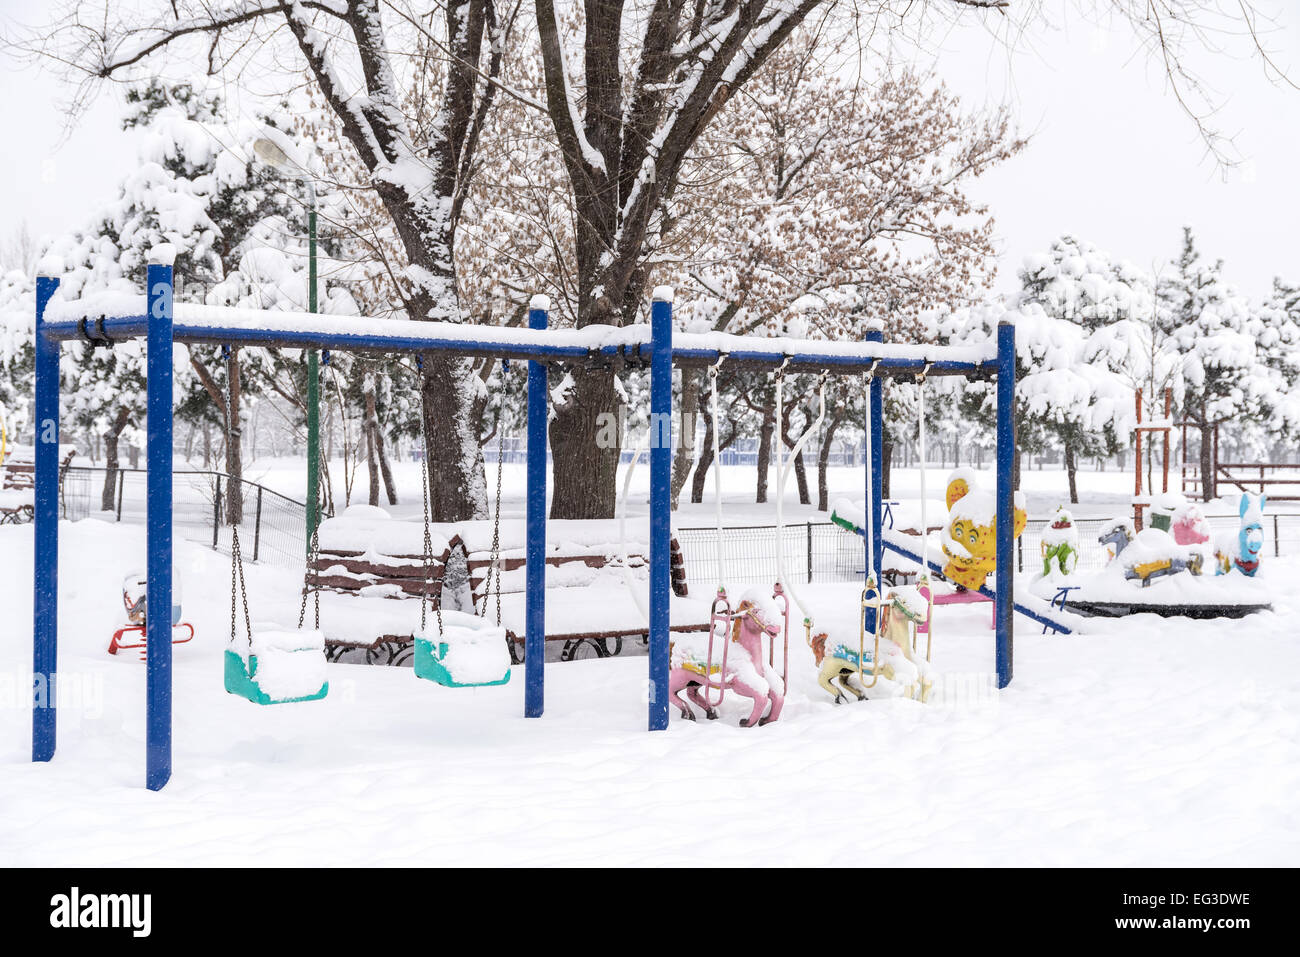 Children Playground In Public Park Covered With Winter Snow Stock Photo